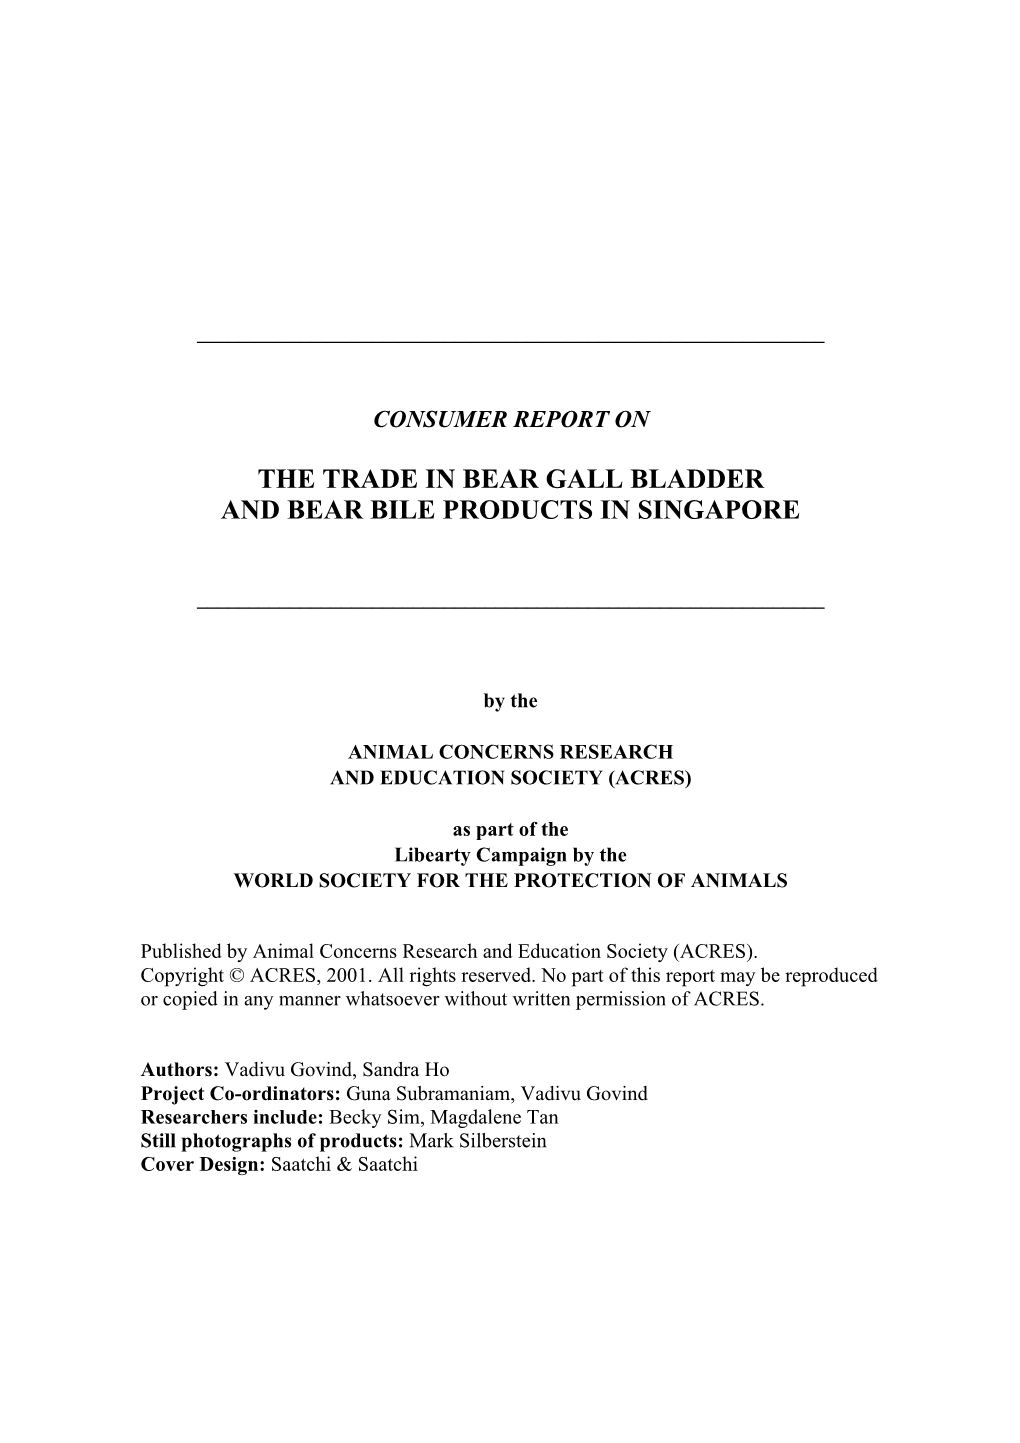 The Trade in Bear Gall Bladder and Bear Bile Products in Singapore